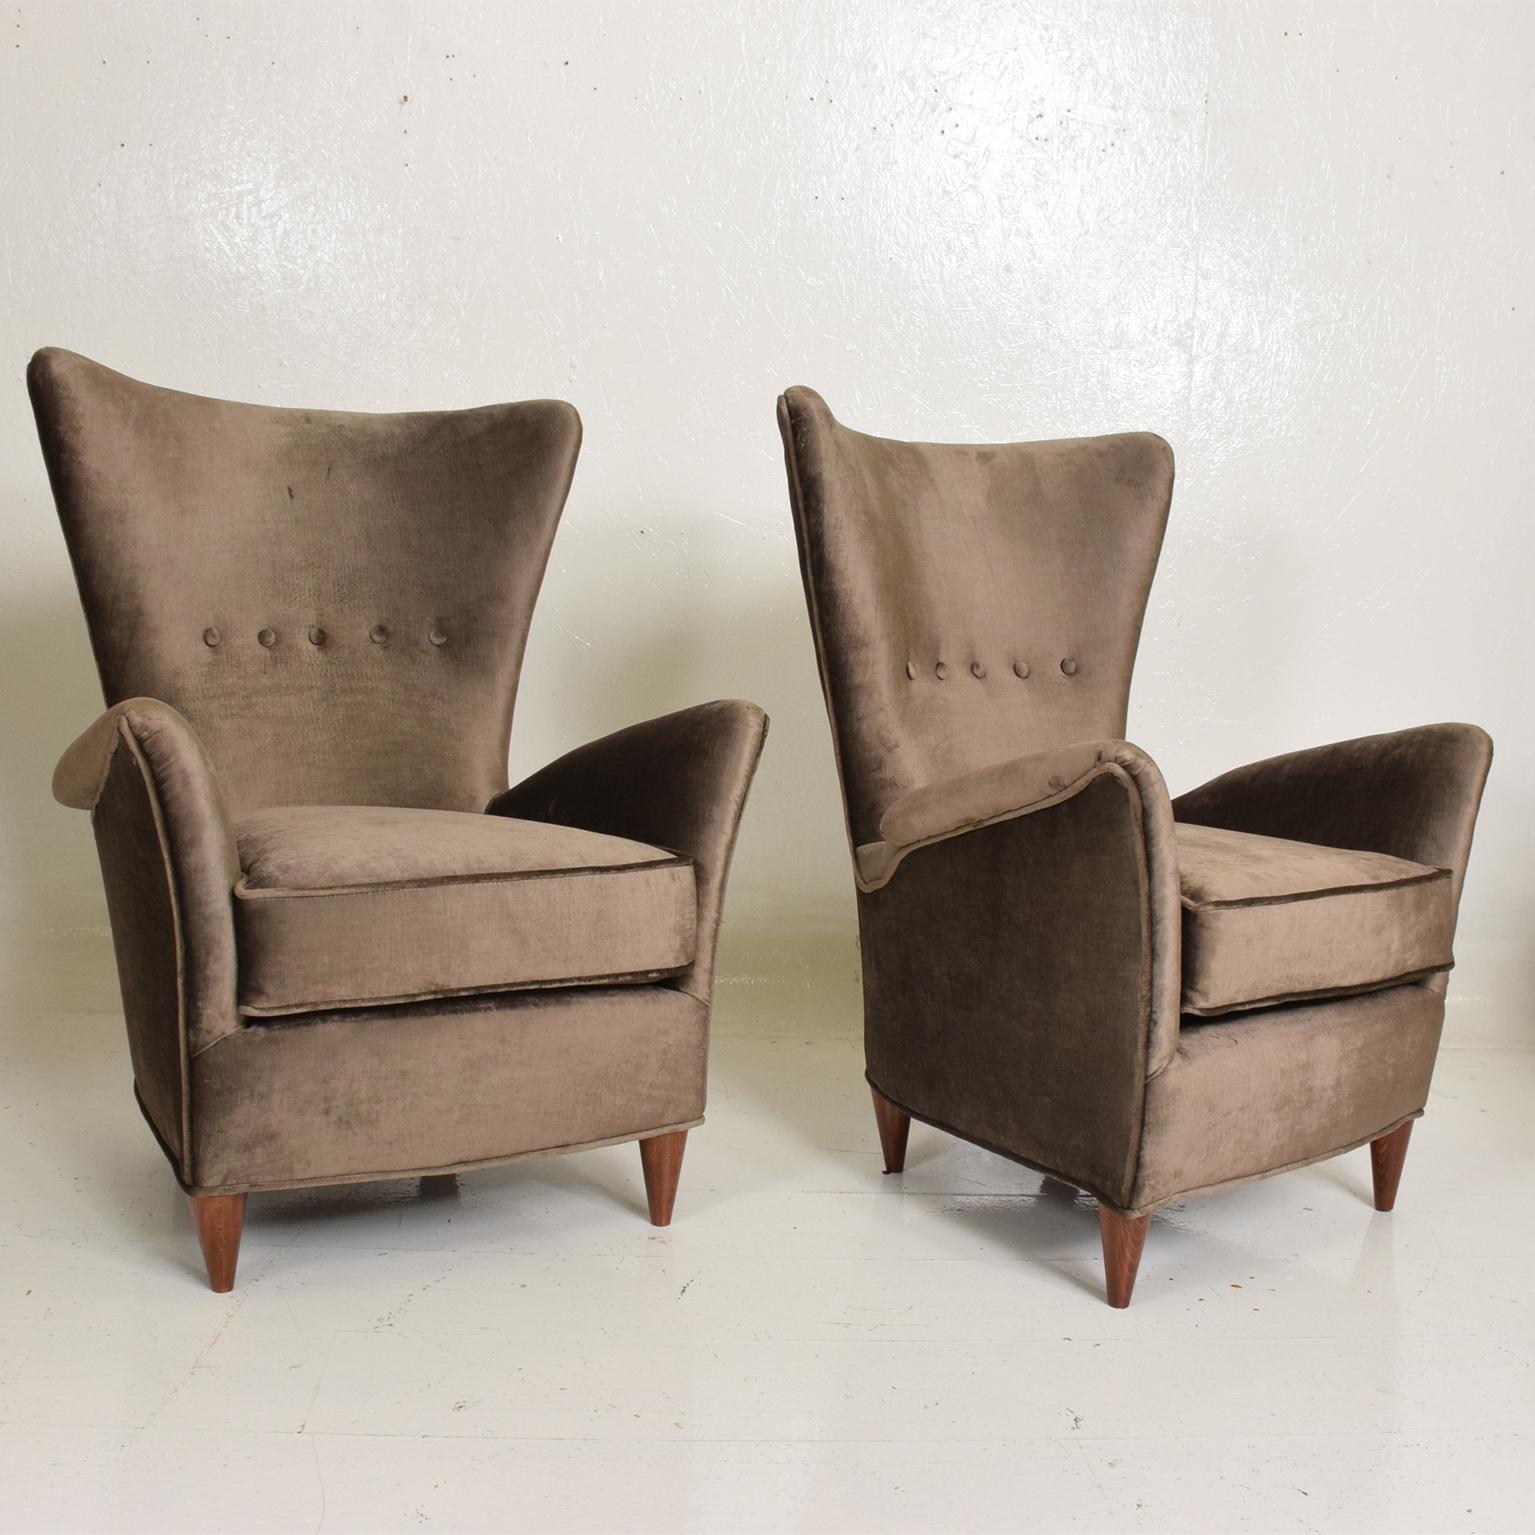 For your consideration, a pair of armchairs of Mid-Century Modern chairs by Gio Ponti for Bristol Hotel in Merano, Italy.

Made in Italy, circa the 1940s. Chairs have been restored with dark grey velvet.

Dimensions: 36 1/2